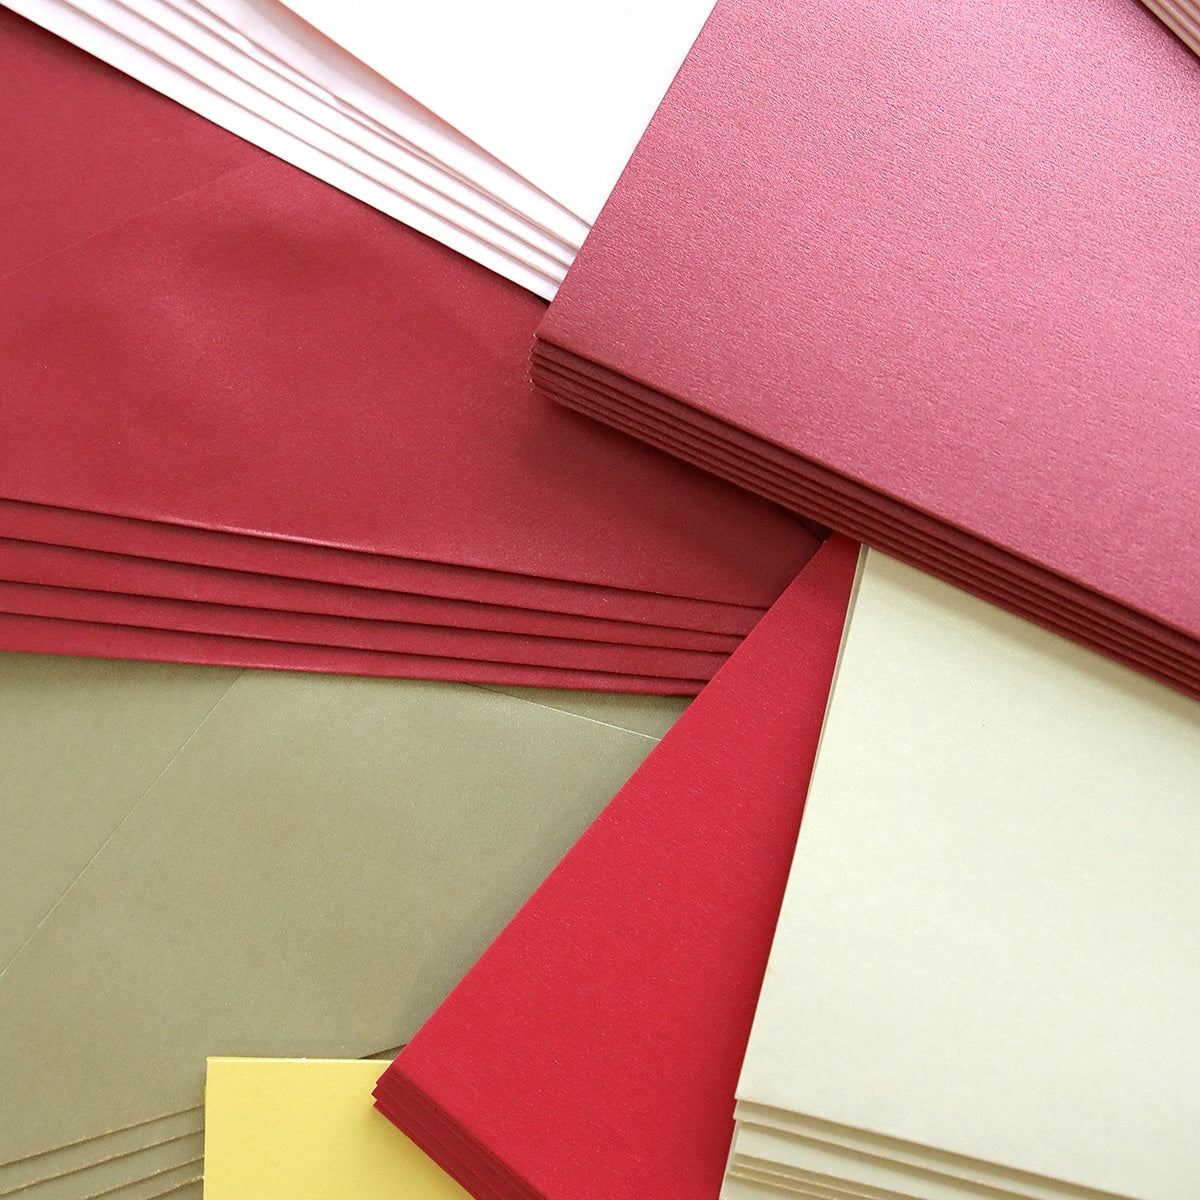 a pile of different colored papers sitting on top of each other.